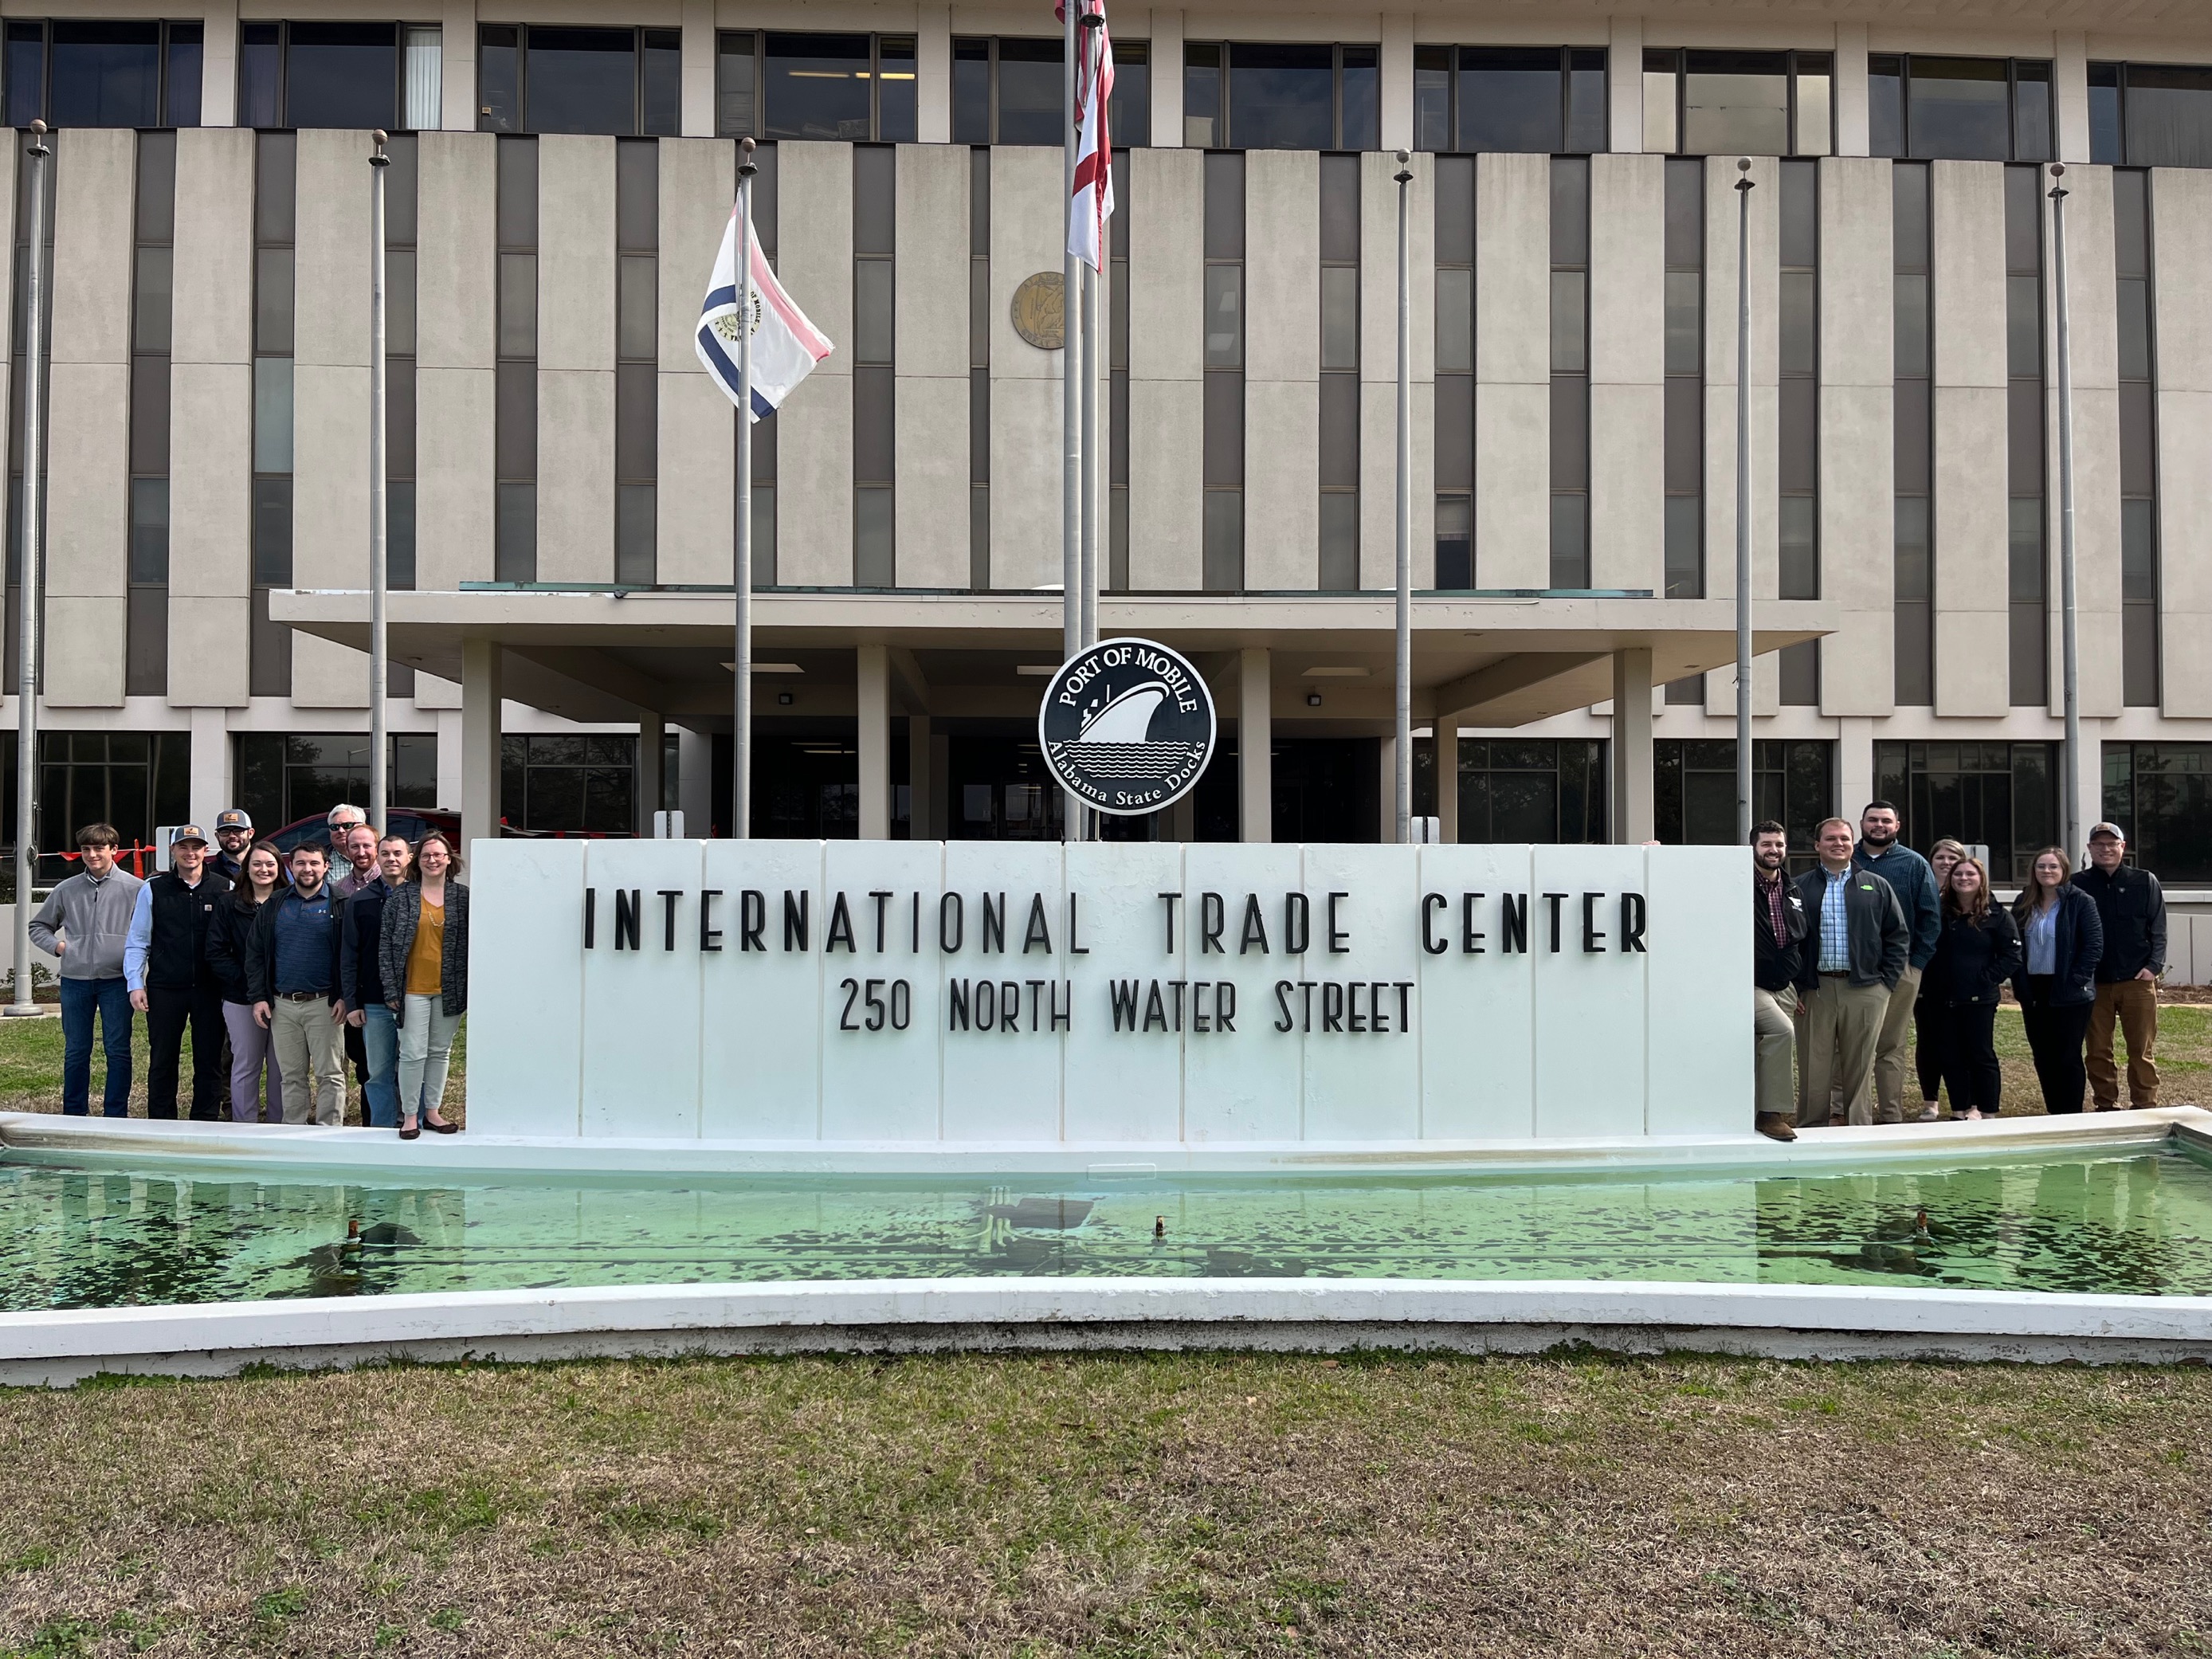 A group of young farmers standing on either side of a sign reading "INTERNATIONAL TRADE CENTER" in front of a large government facility.